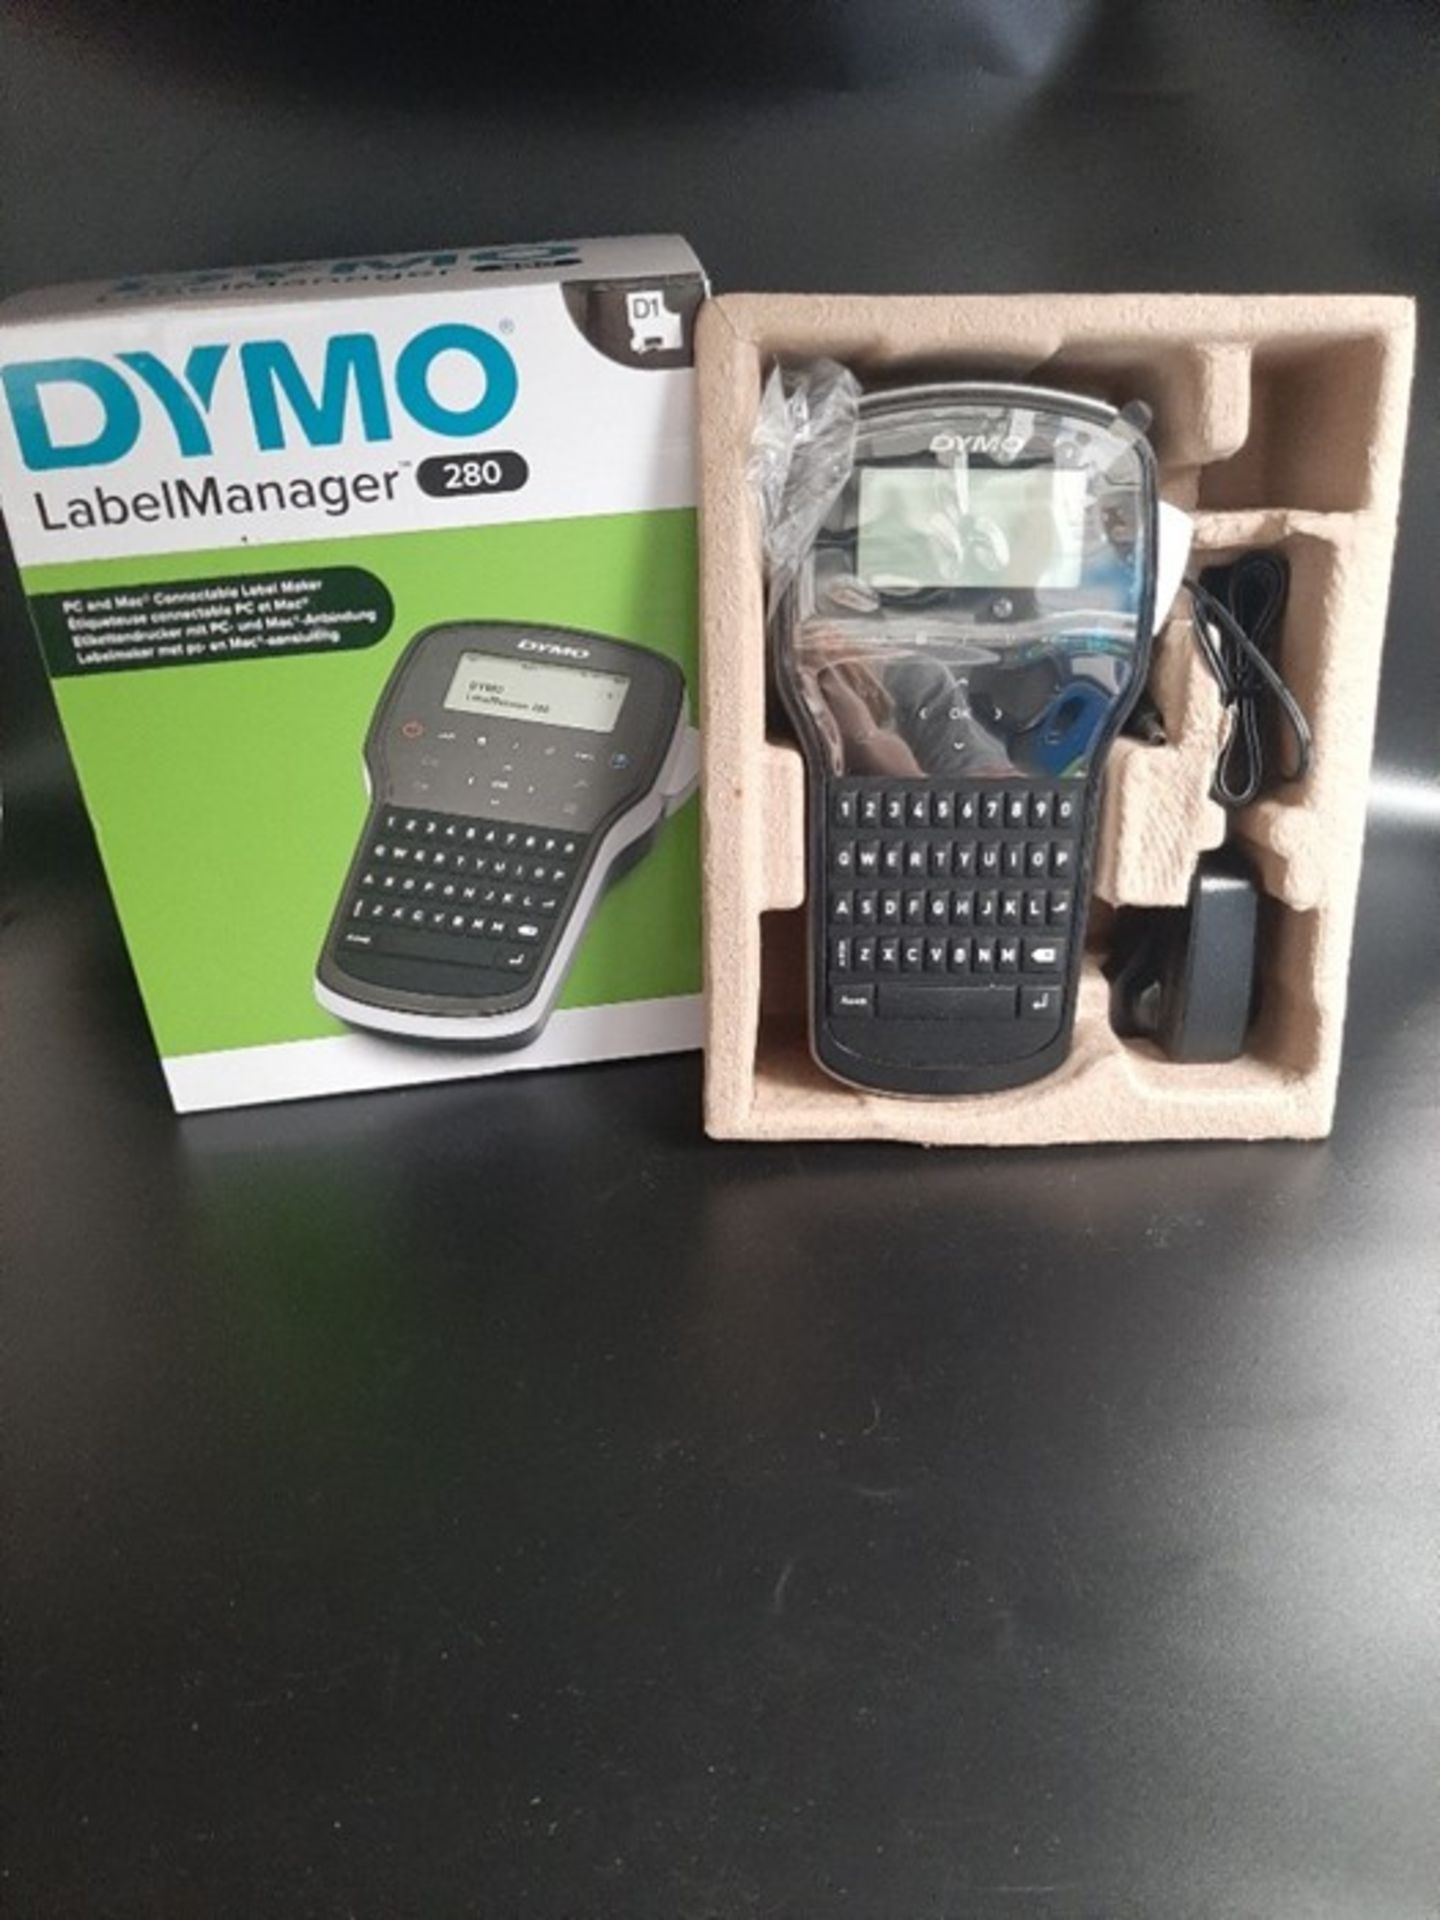 RRP £52.00 Dymo LabelManager 280 Rechargeable Handheld Label Maker with QWERTY Keyboard - Image 2 of 2